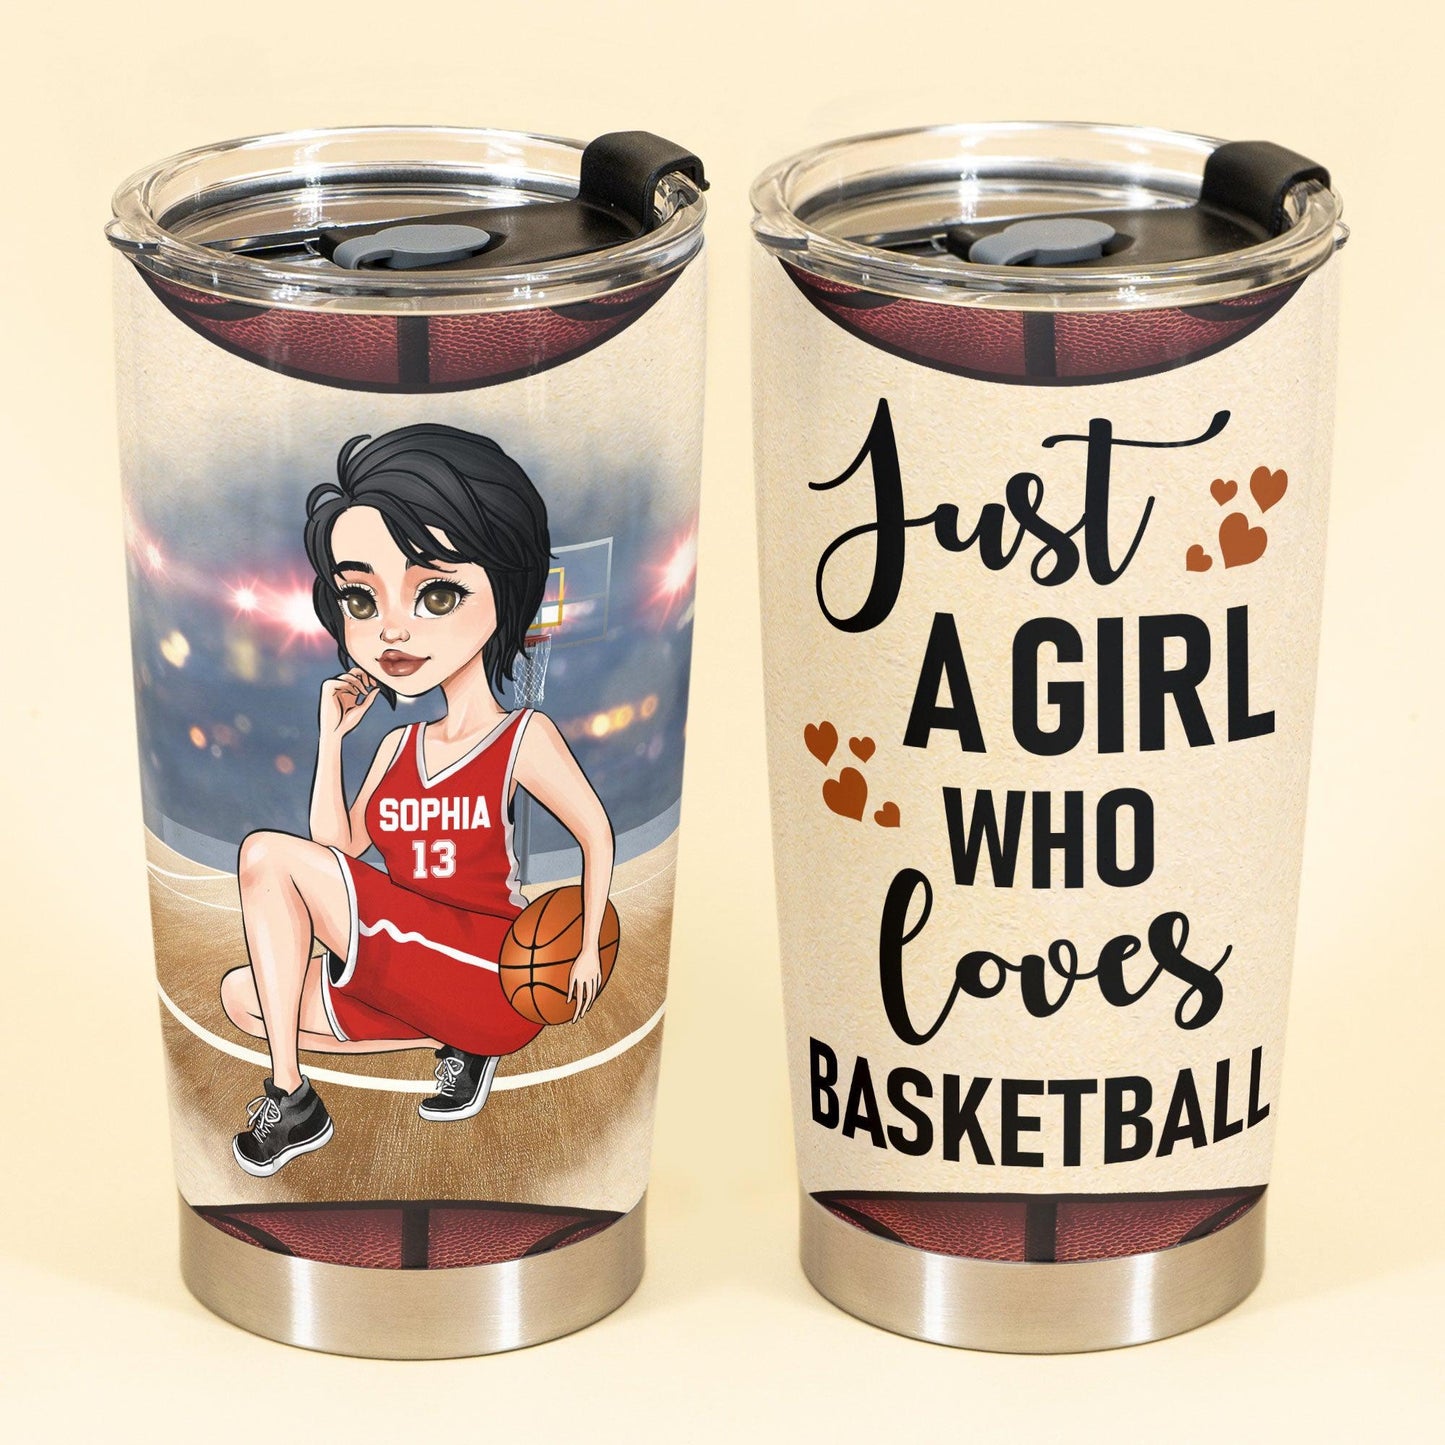 A Girl Loves Basketball - Personalized Tumbler Cup - Birthday Gift For Basketball Lover, Friend, Daughter.